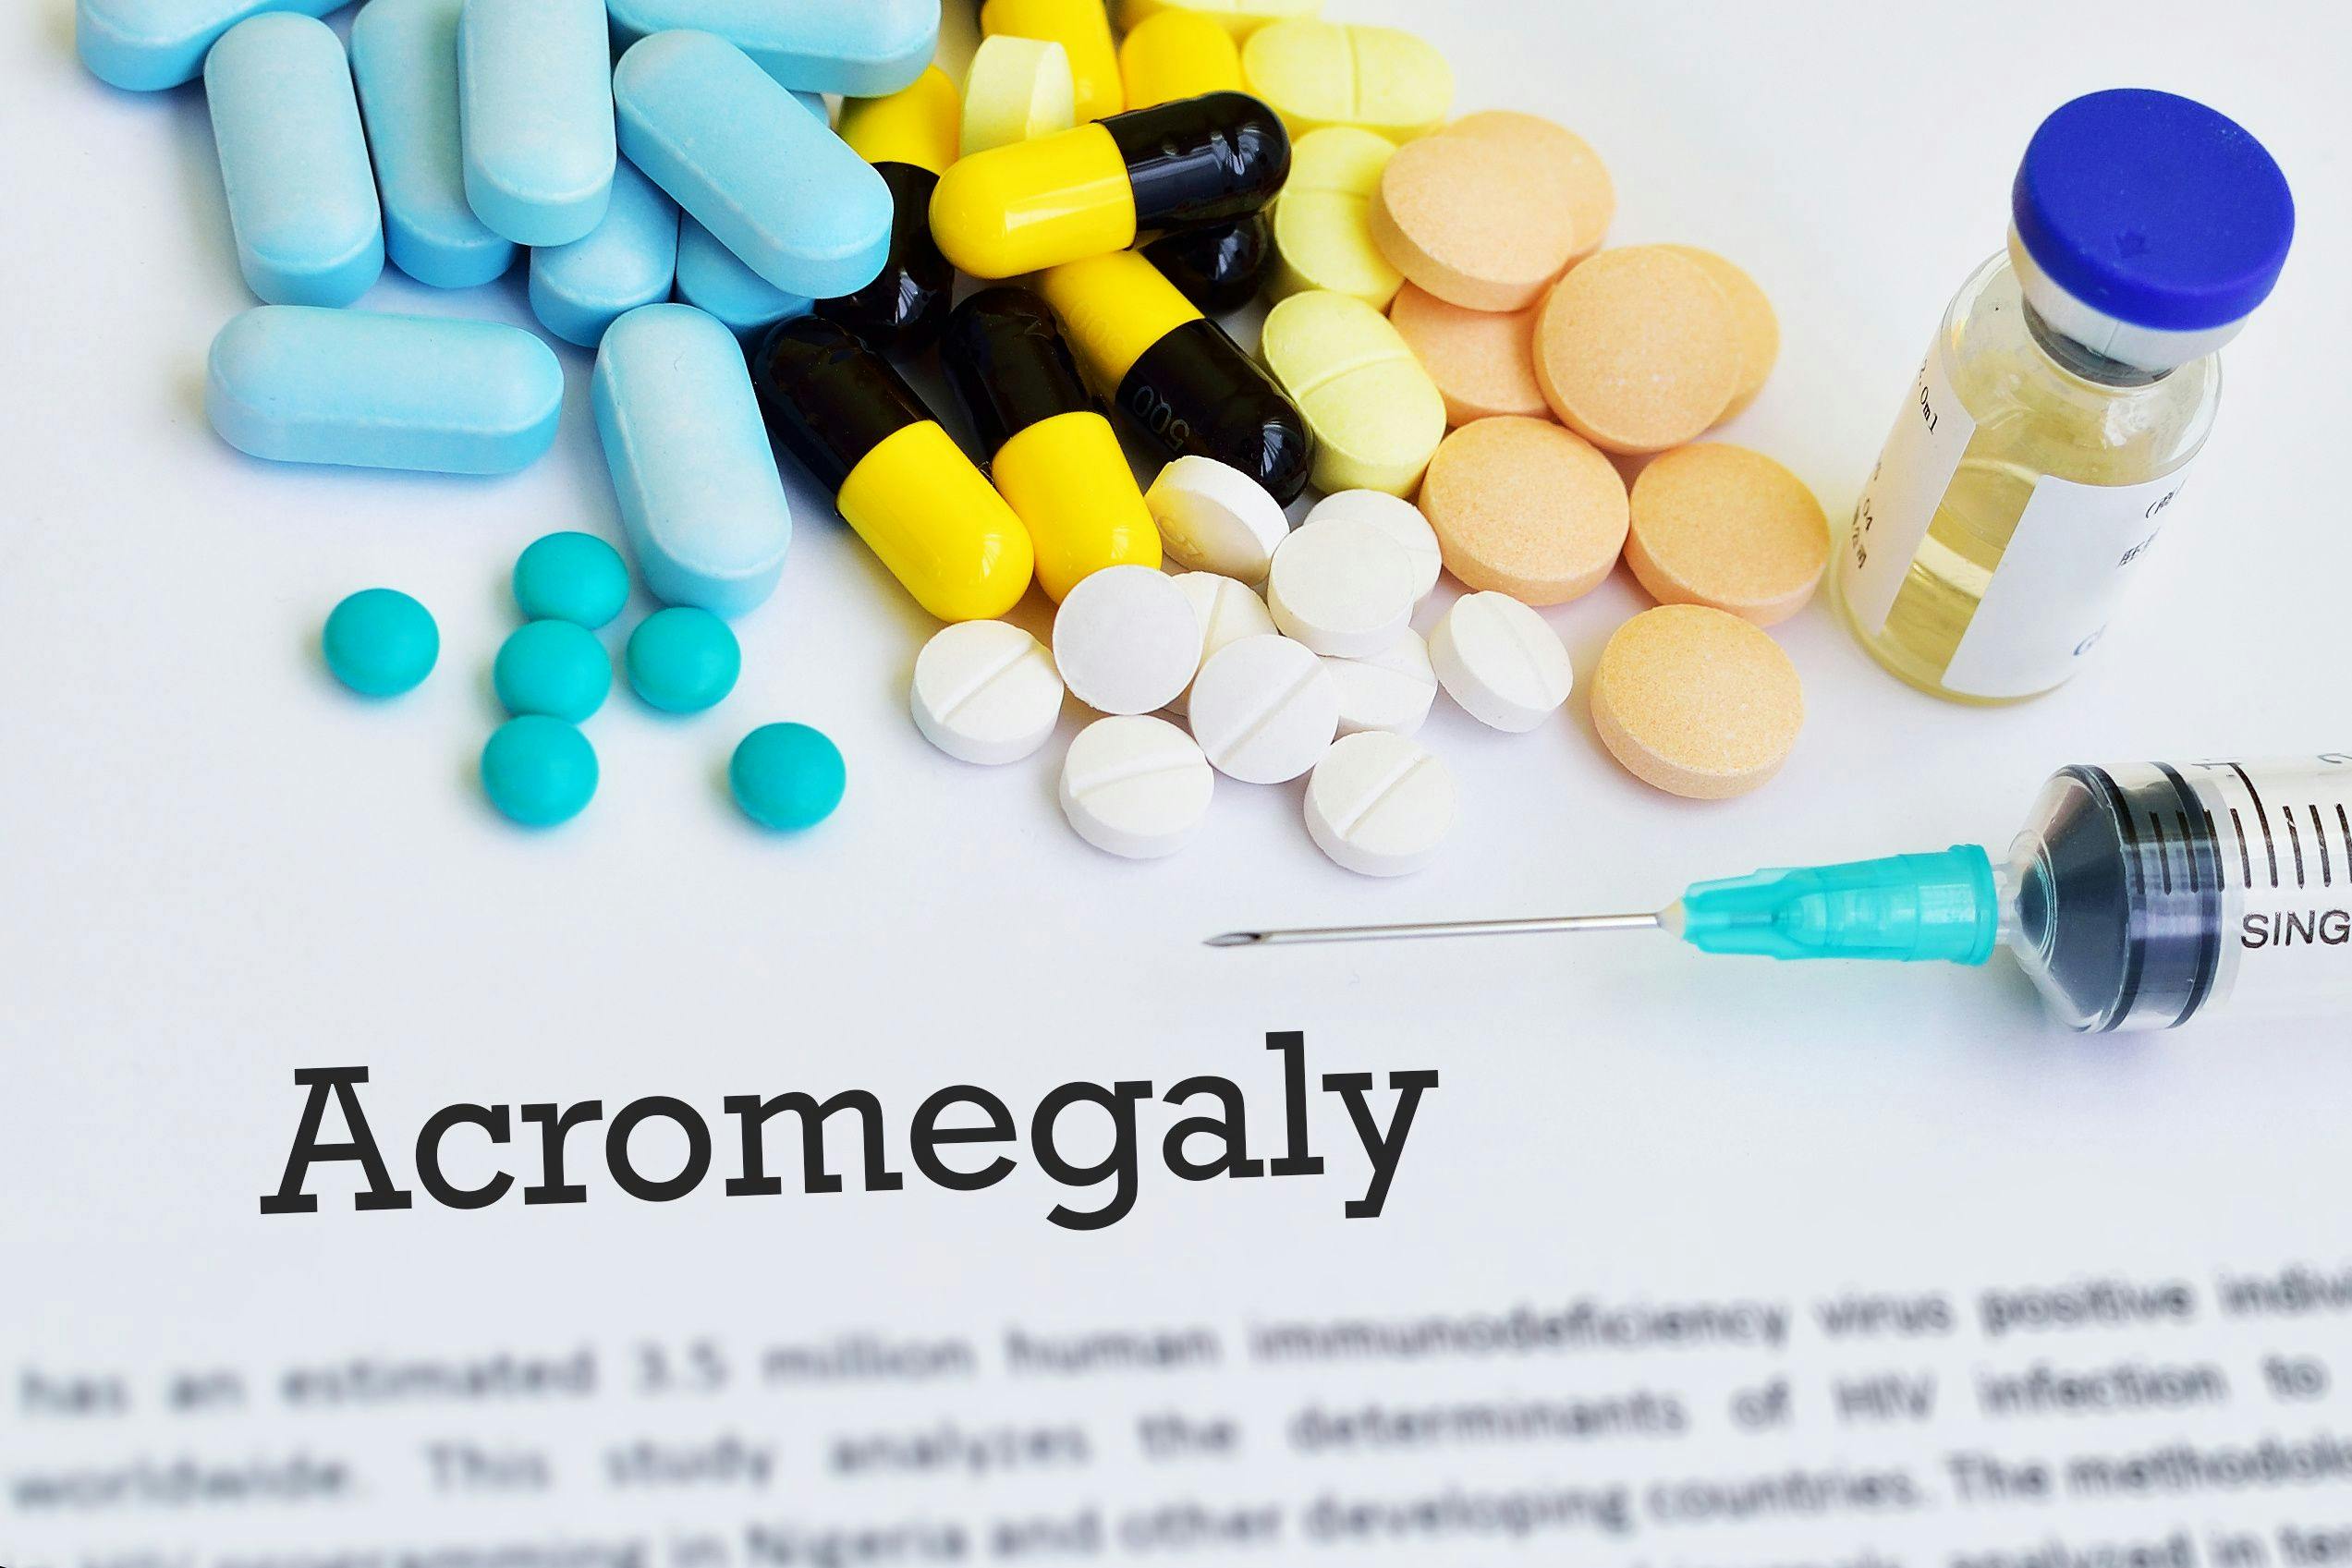 Drugs for Acromegaly treatment, abnormal growth hormone disease | Image credit: jarun011 - stock.adobe.com